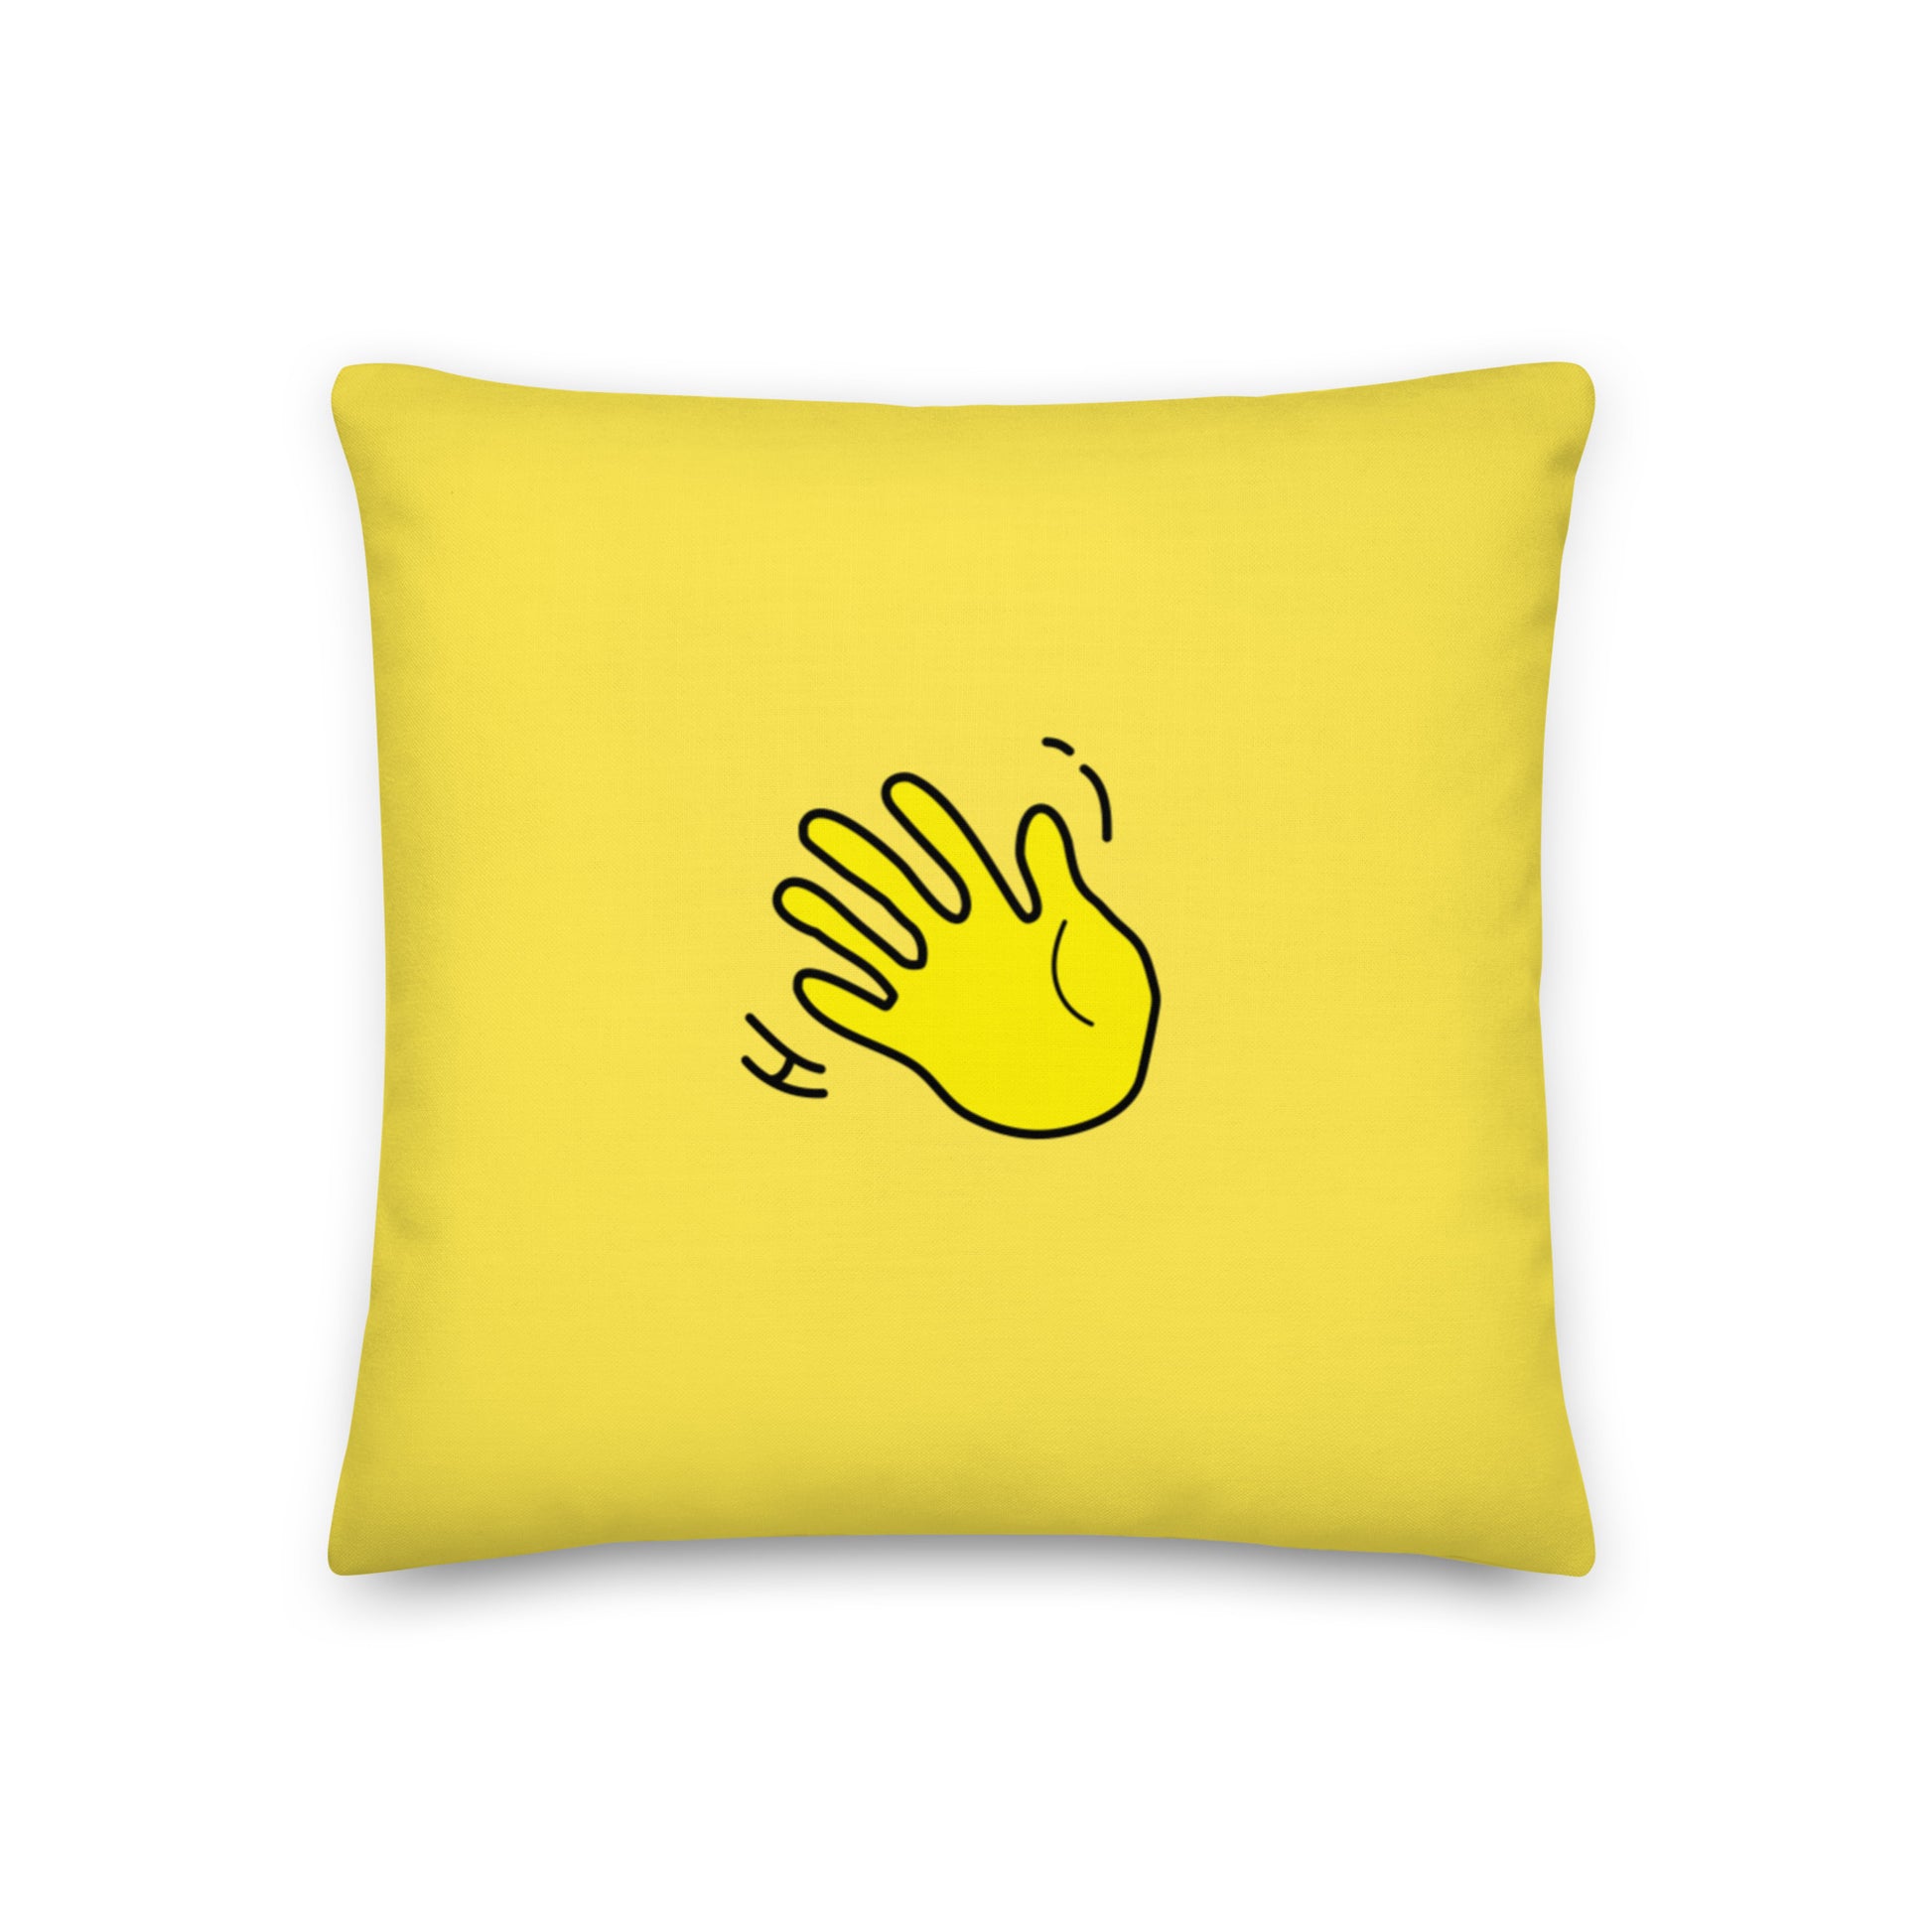 Hi Pillow in yellow with Hi emoji by HiJohnny.com